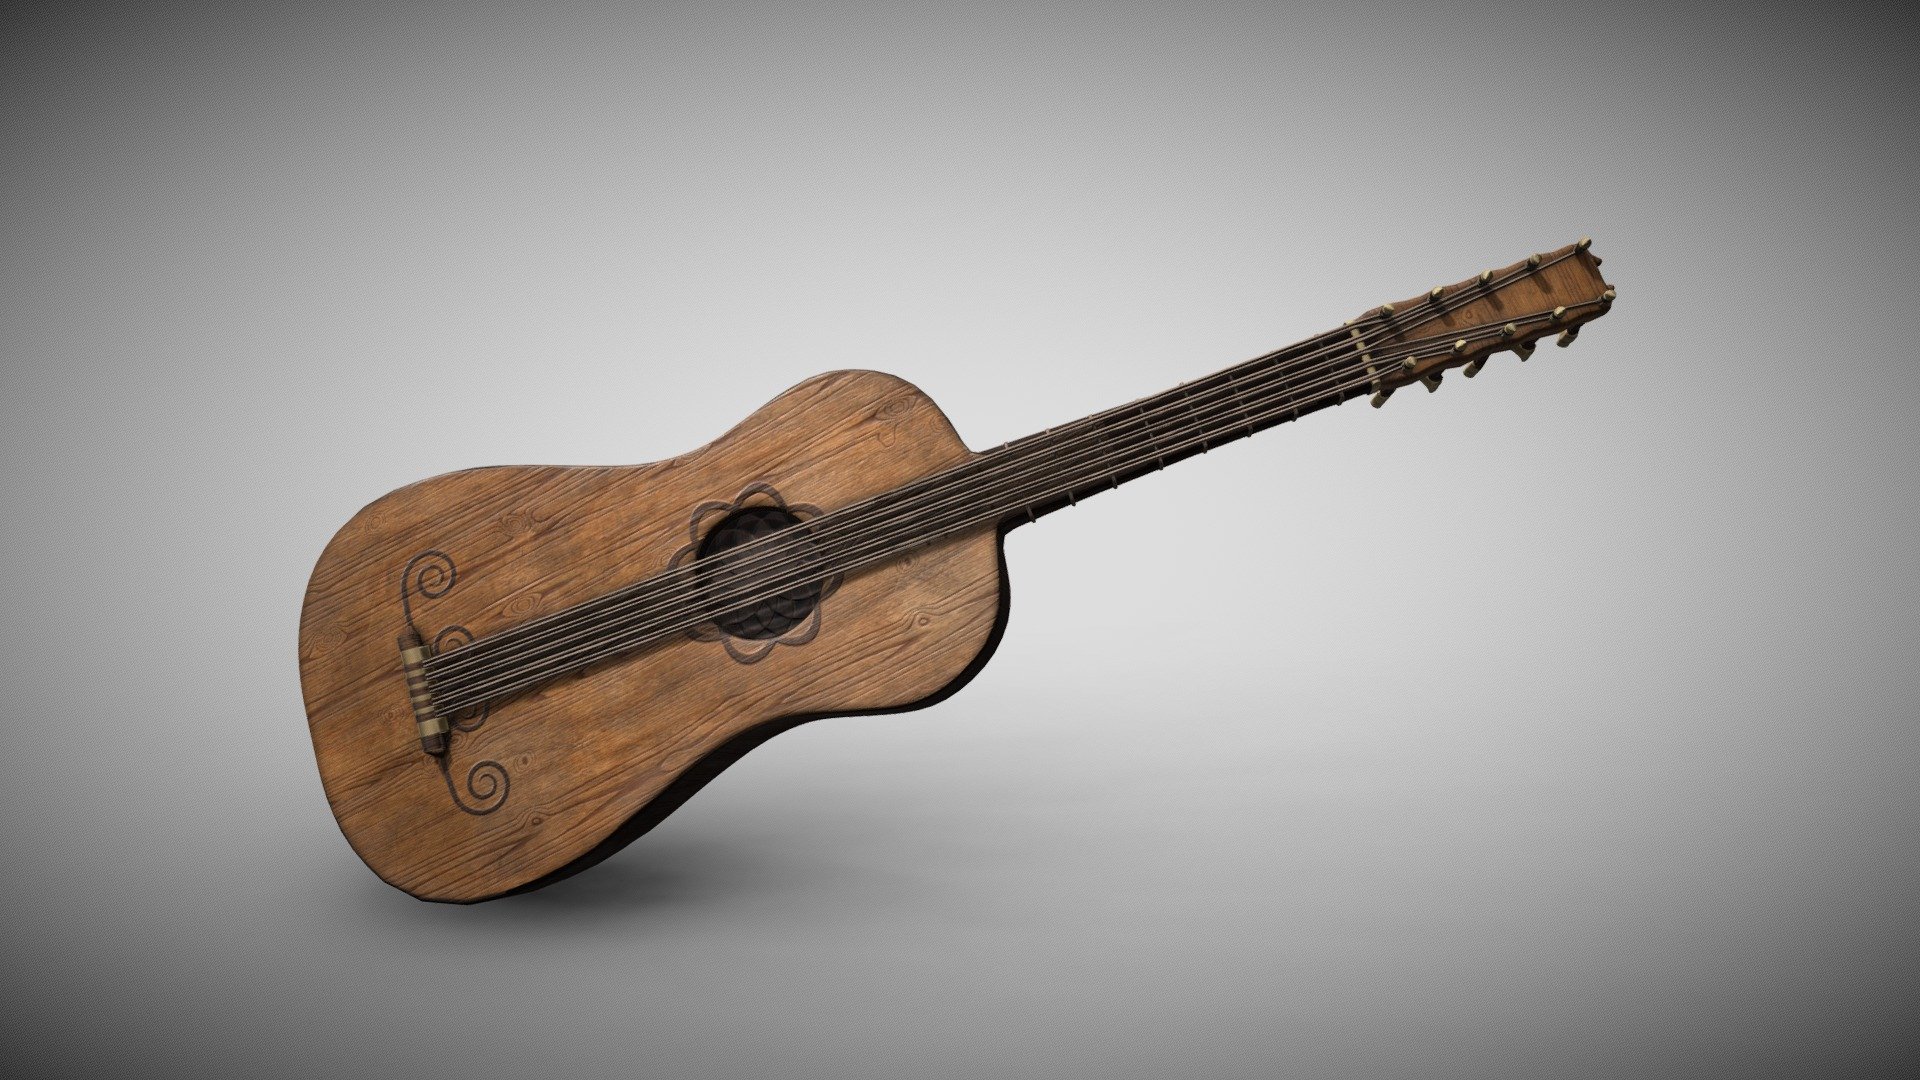 The Baroque guitar replaced the Renaissance lute as the most common instrument found in the home. The earliest attestation of a five-stringed guitar comes from the mid-sixteenth-century Spanish book Declaracion de Instrumentos Musicales by Juan Bermudo, published in 1555. The first treatise published for the Baroque guitar was Guitarra Española de cinco ordenes (The Five-course Spanish Guitar), c. 1590, by Juan Carlos Amat.

The baroque guitar in contemporary ensembles took on the role of a basso continuo instrument and players would be expected to improvise a chordal accompaniment. Several scholars have assumed that the guitar was used together with another basso continuo instrument playing the bass line. However, there are good reasons to suppose that the guitar was used as an independent instrument for accompaniment in many situations. Intimately tied to the development of the Baroque guitar is the alfabeto system of notation 3d model